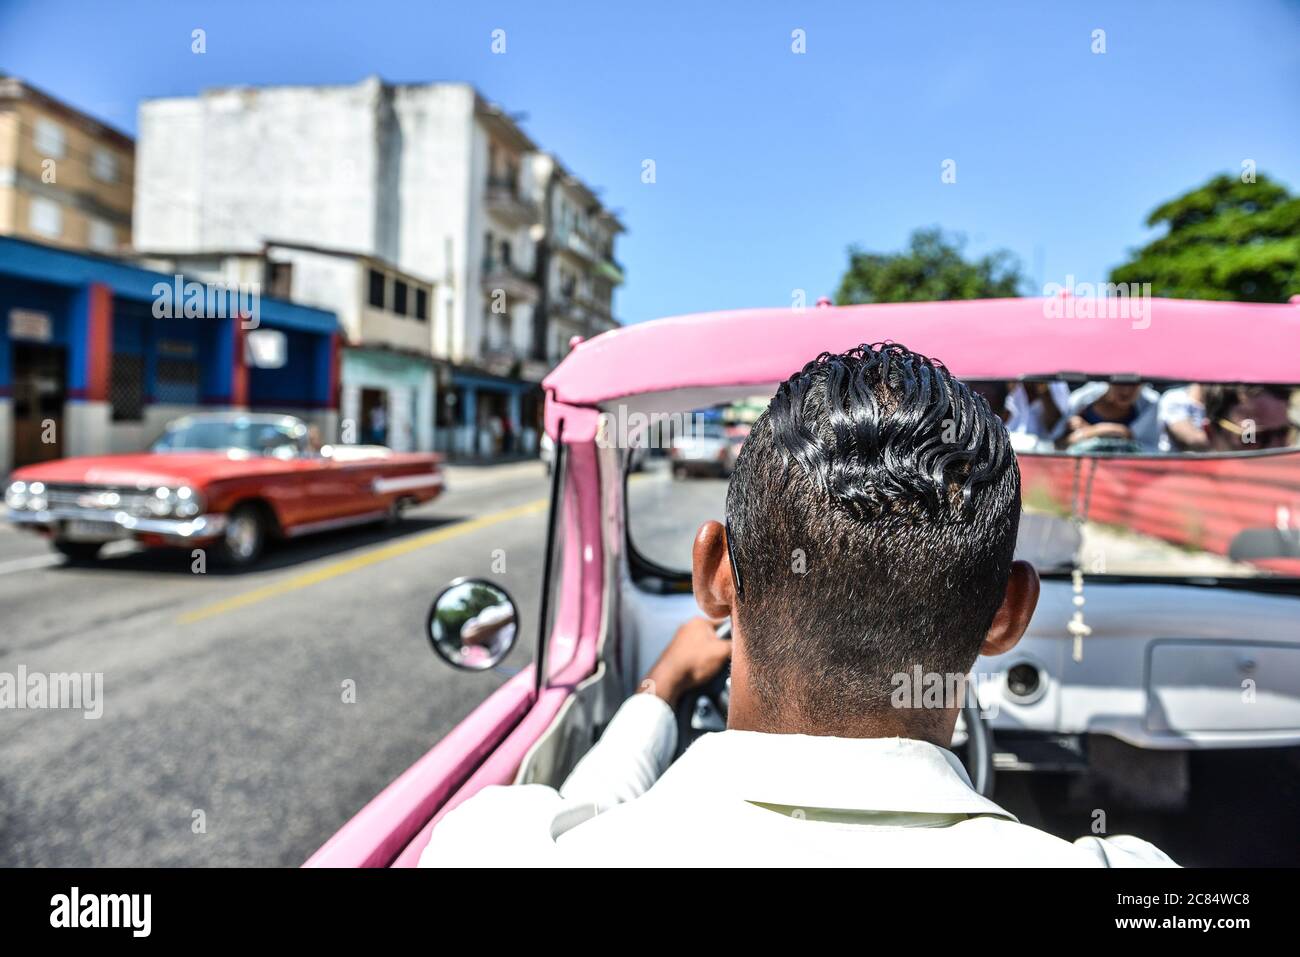 Cuba, Havana: classic American cars. Two vehicles passing each other, including an old red Chevrolet. Man viewed from behind driving a taxi, a pink an Stock Photo